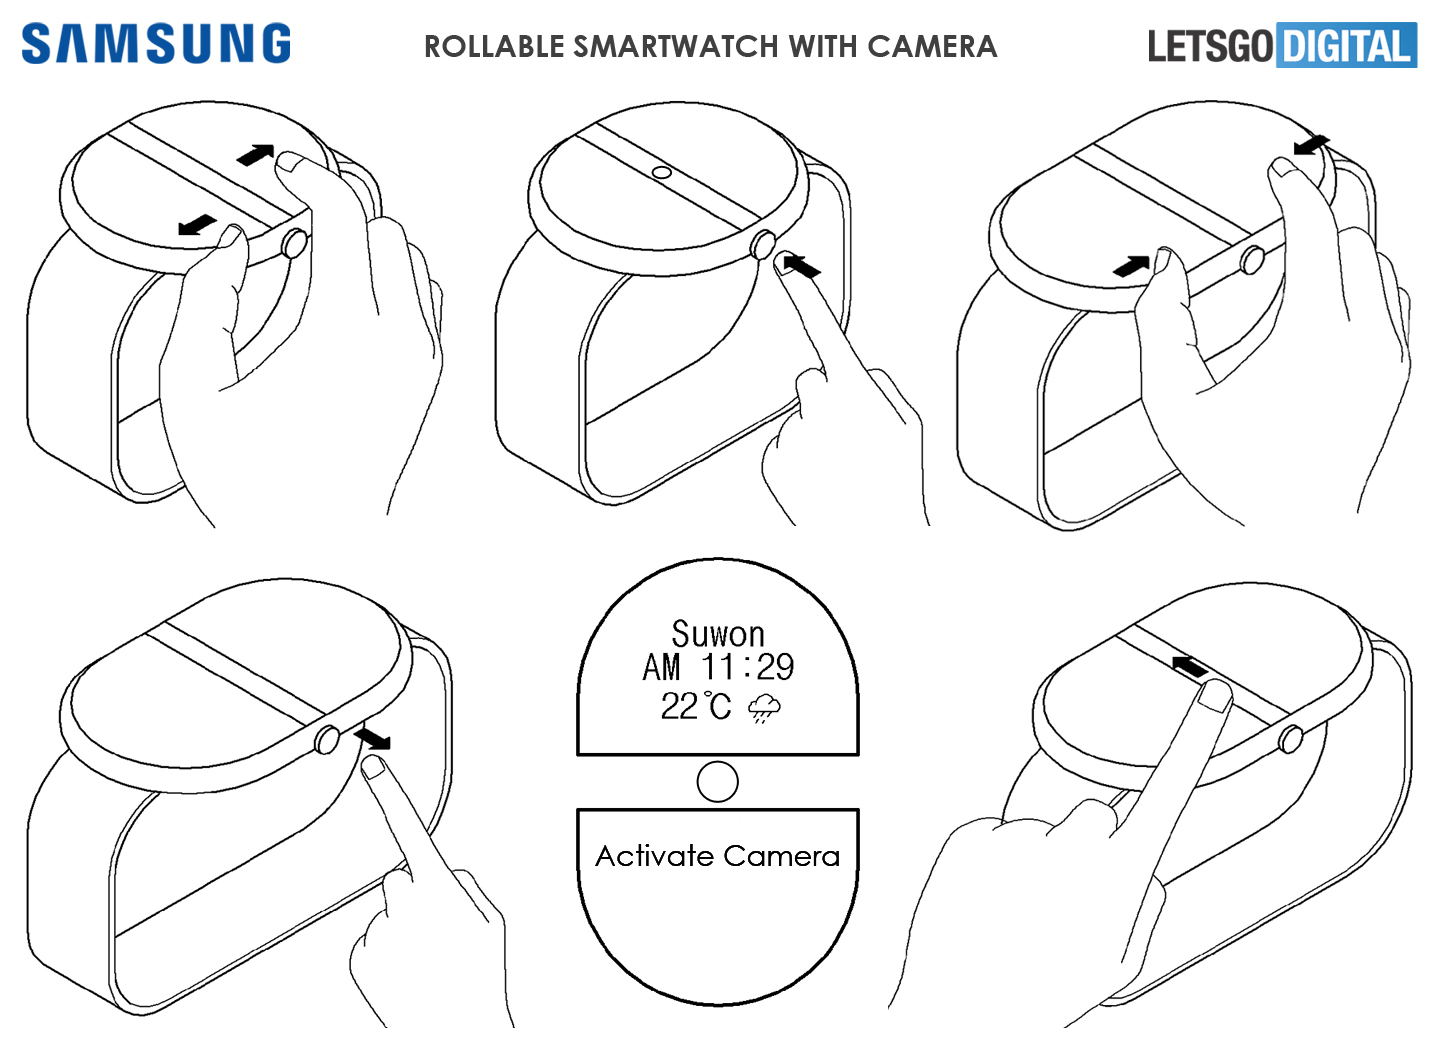 Samsung rollable watch